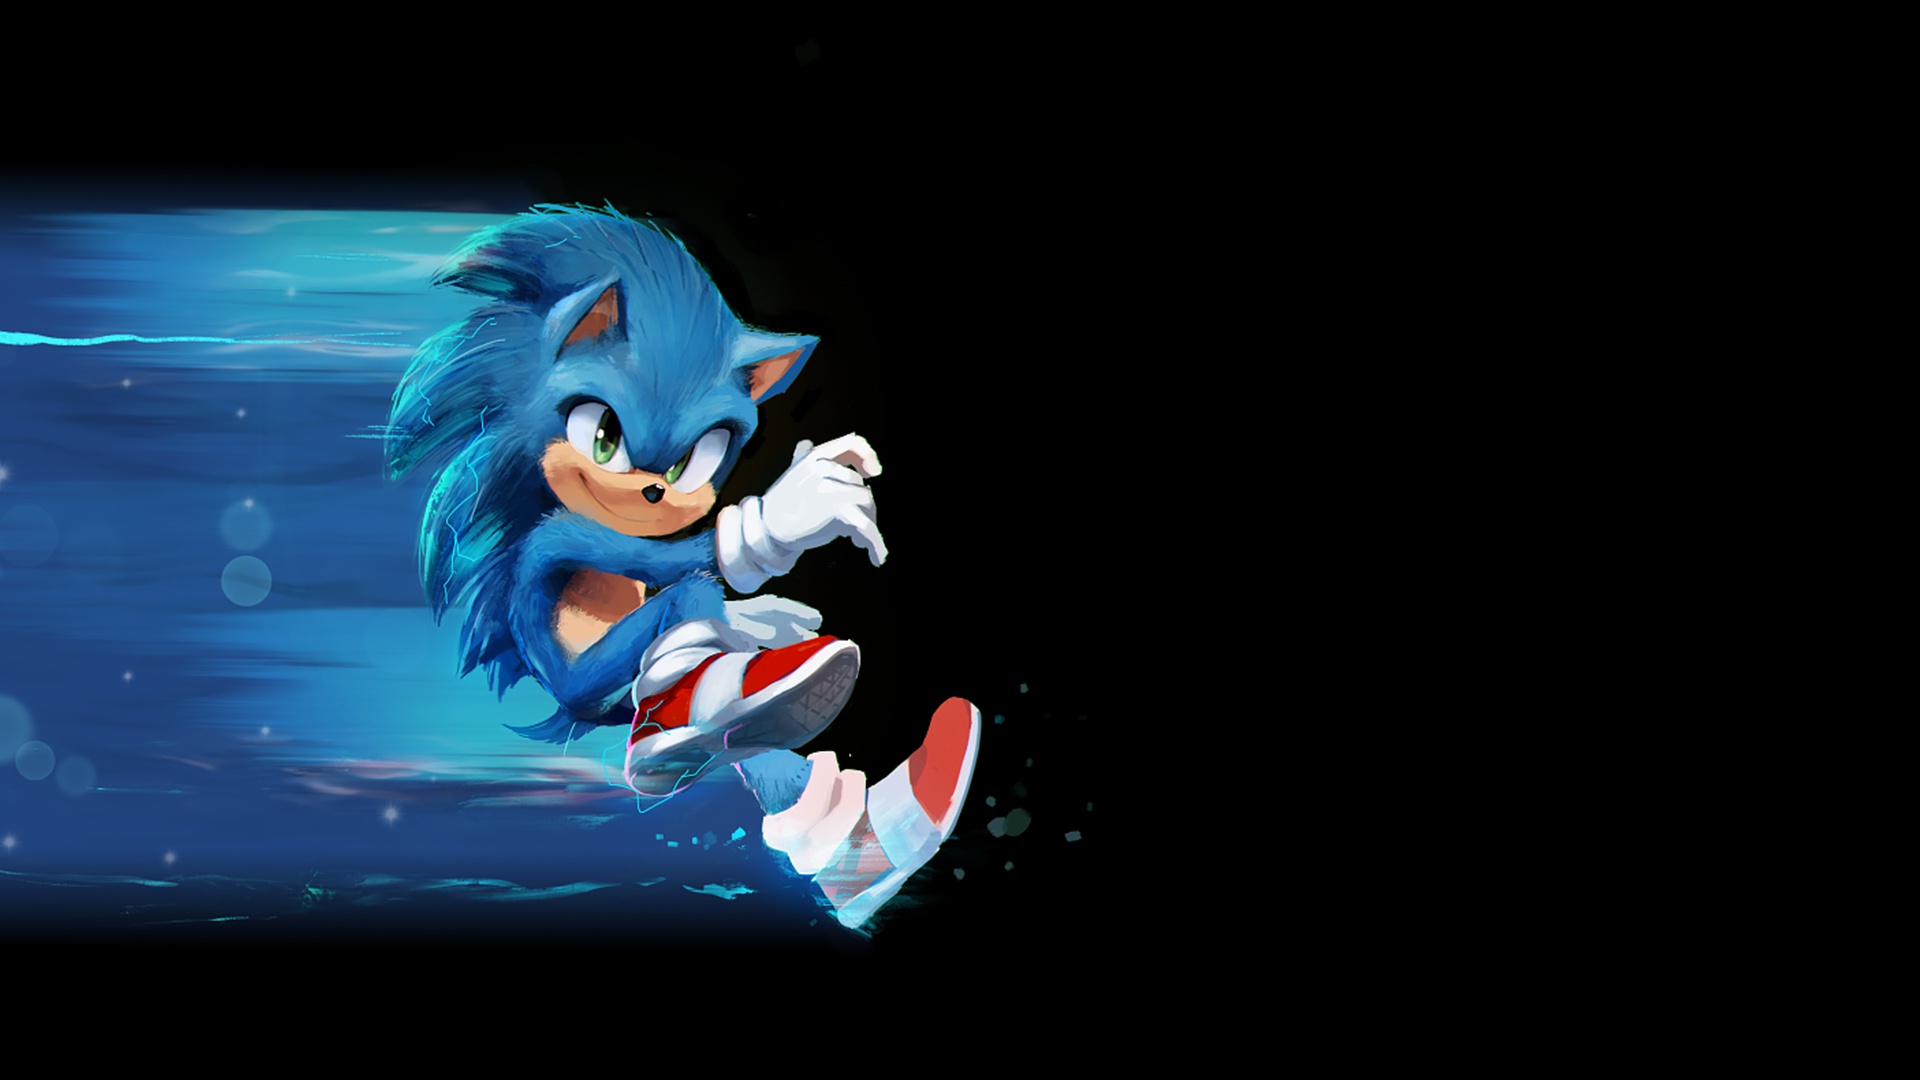 Sonic The Hedgehog Video Game HD Background Wallpaper.